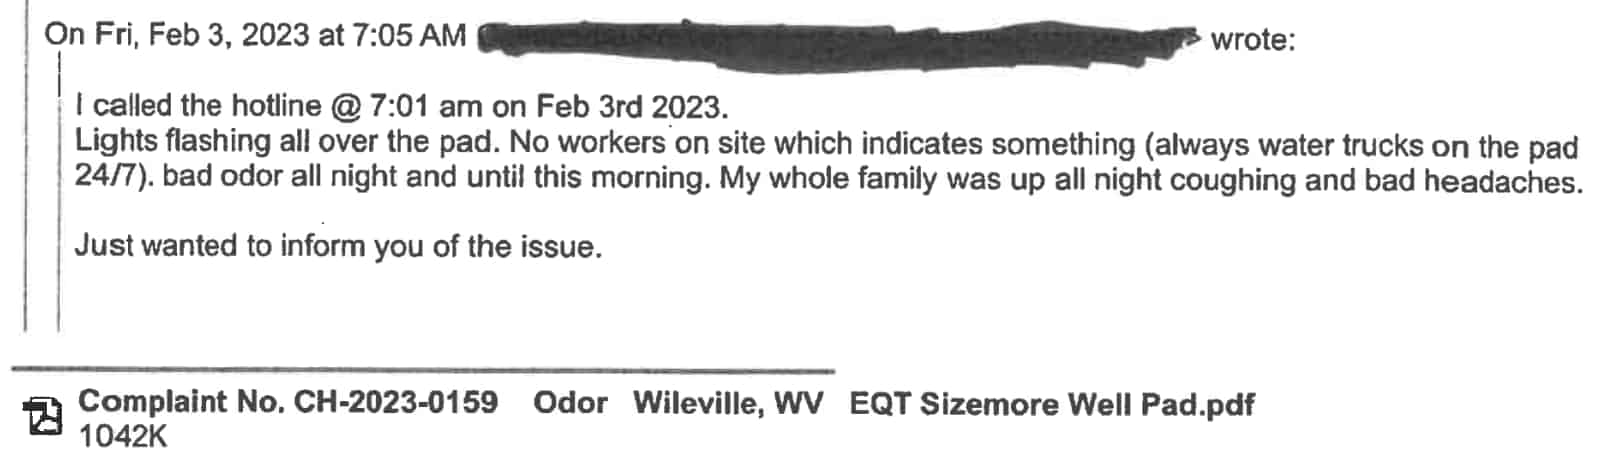 A screenshot of a complaint to the West Virginia Department of Environmental Protection.